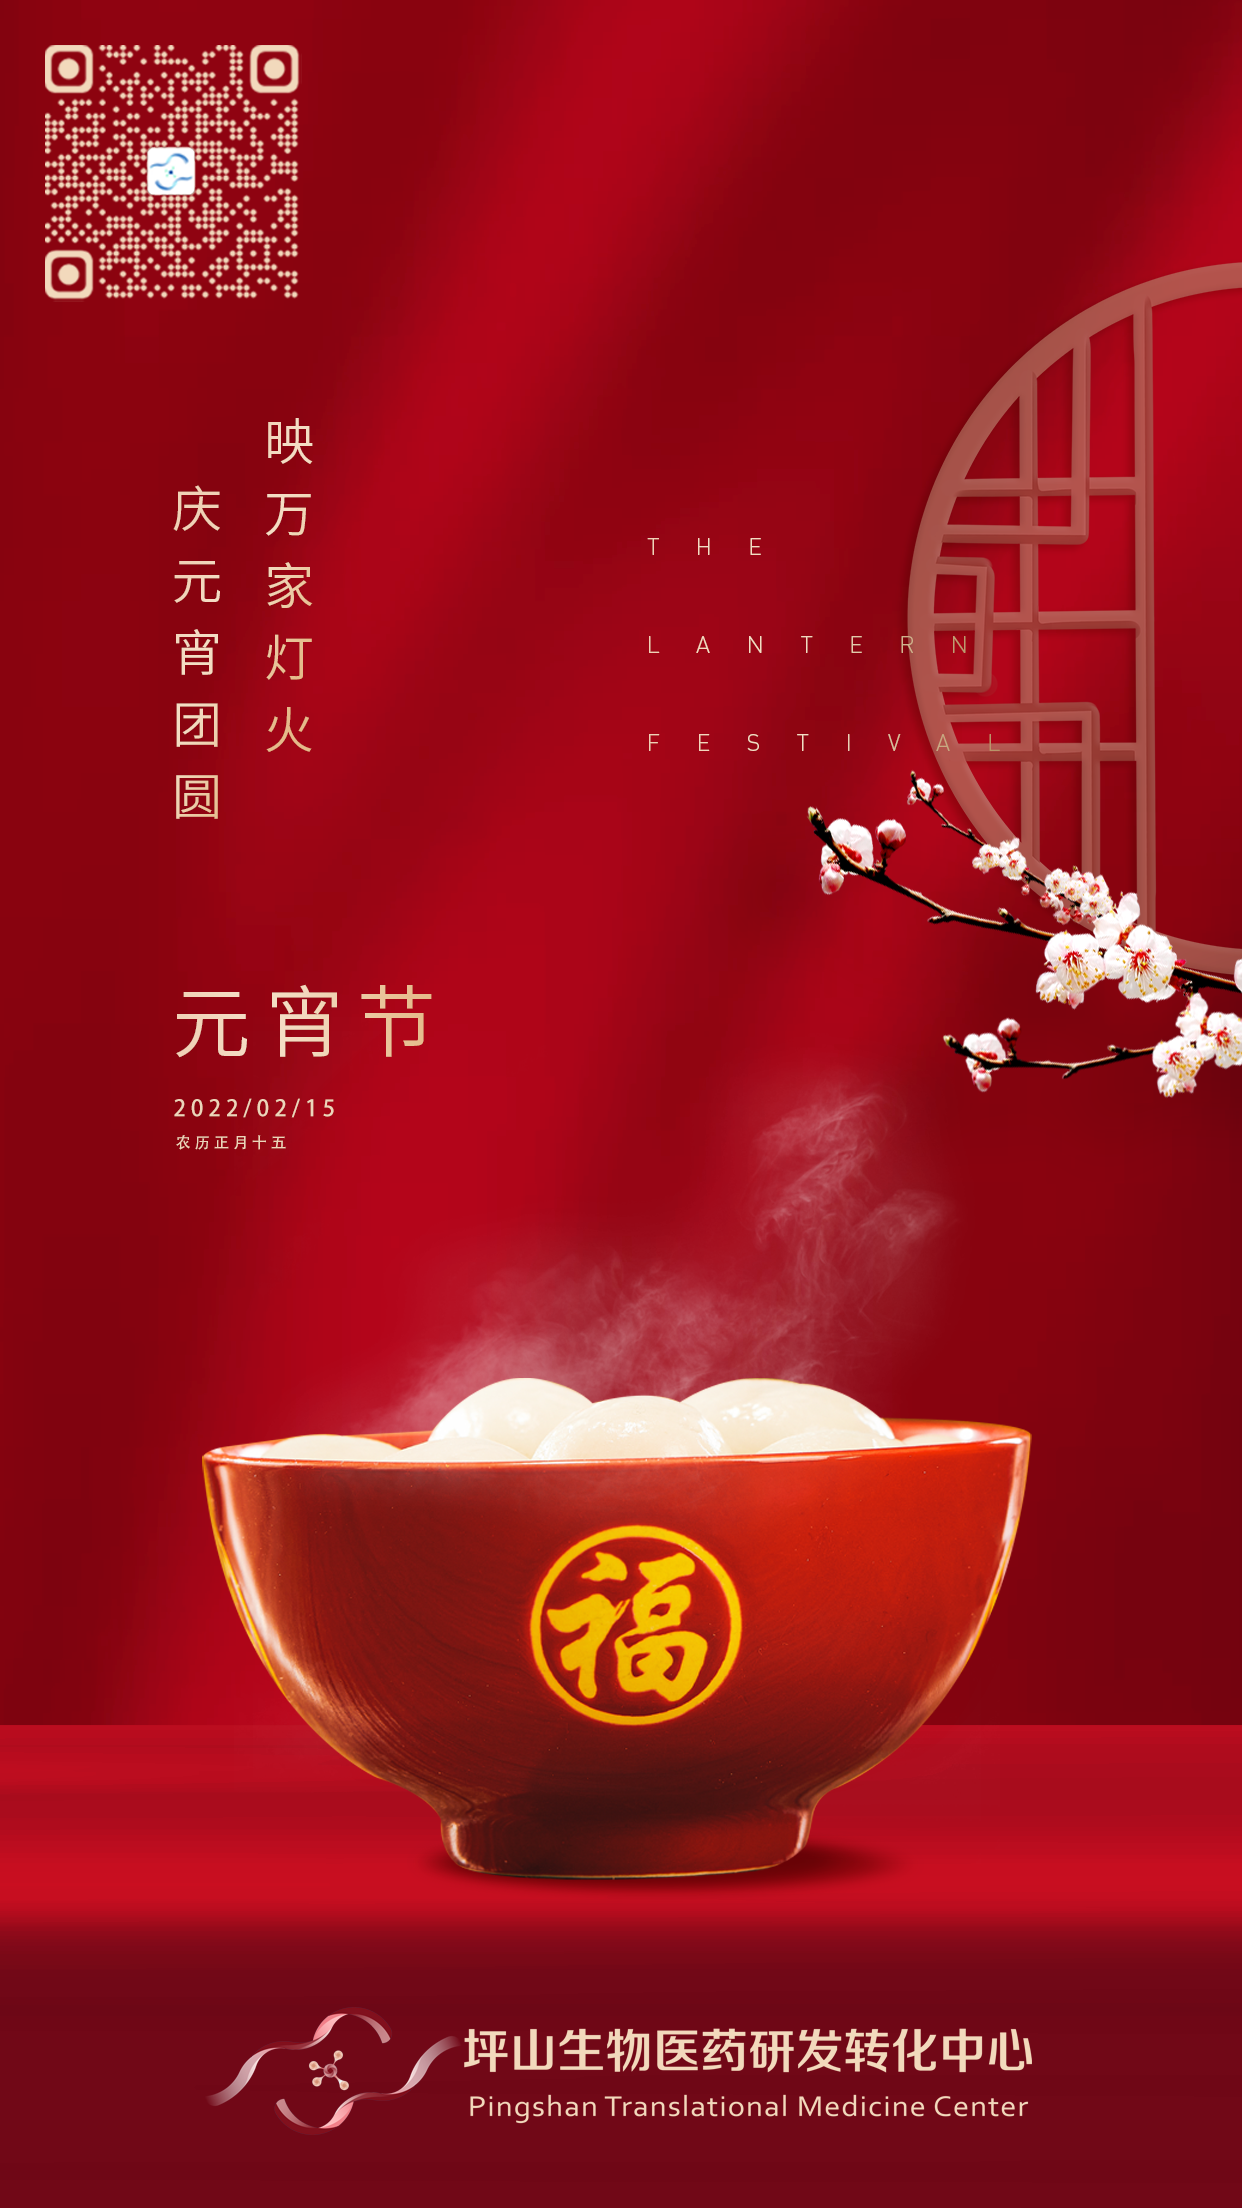 Pingshan Center wishes you a happy Lantern Festival